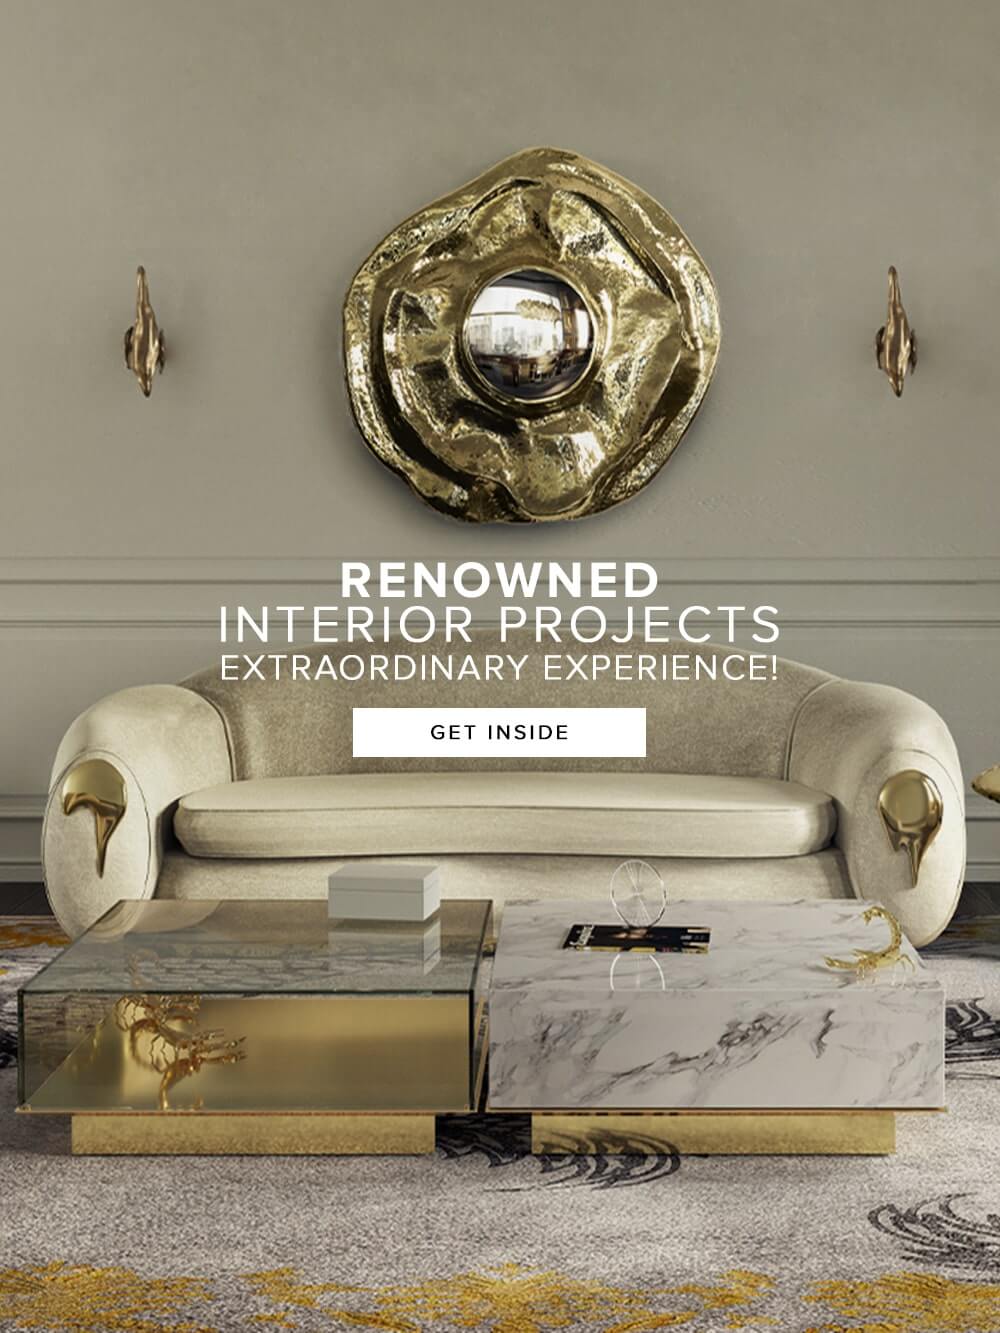 Renowned Project Interiors - Extraordinary Experience - Get Inside